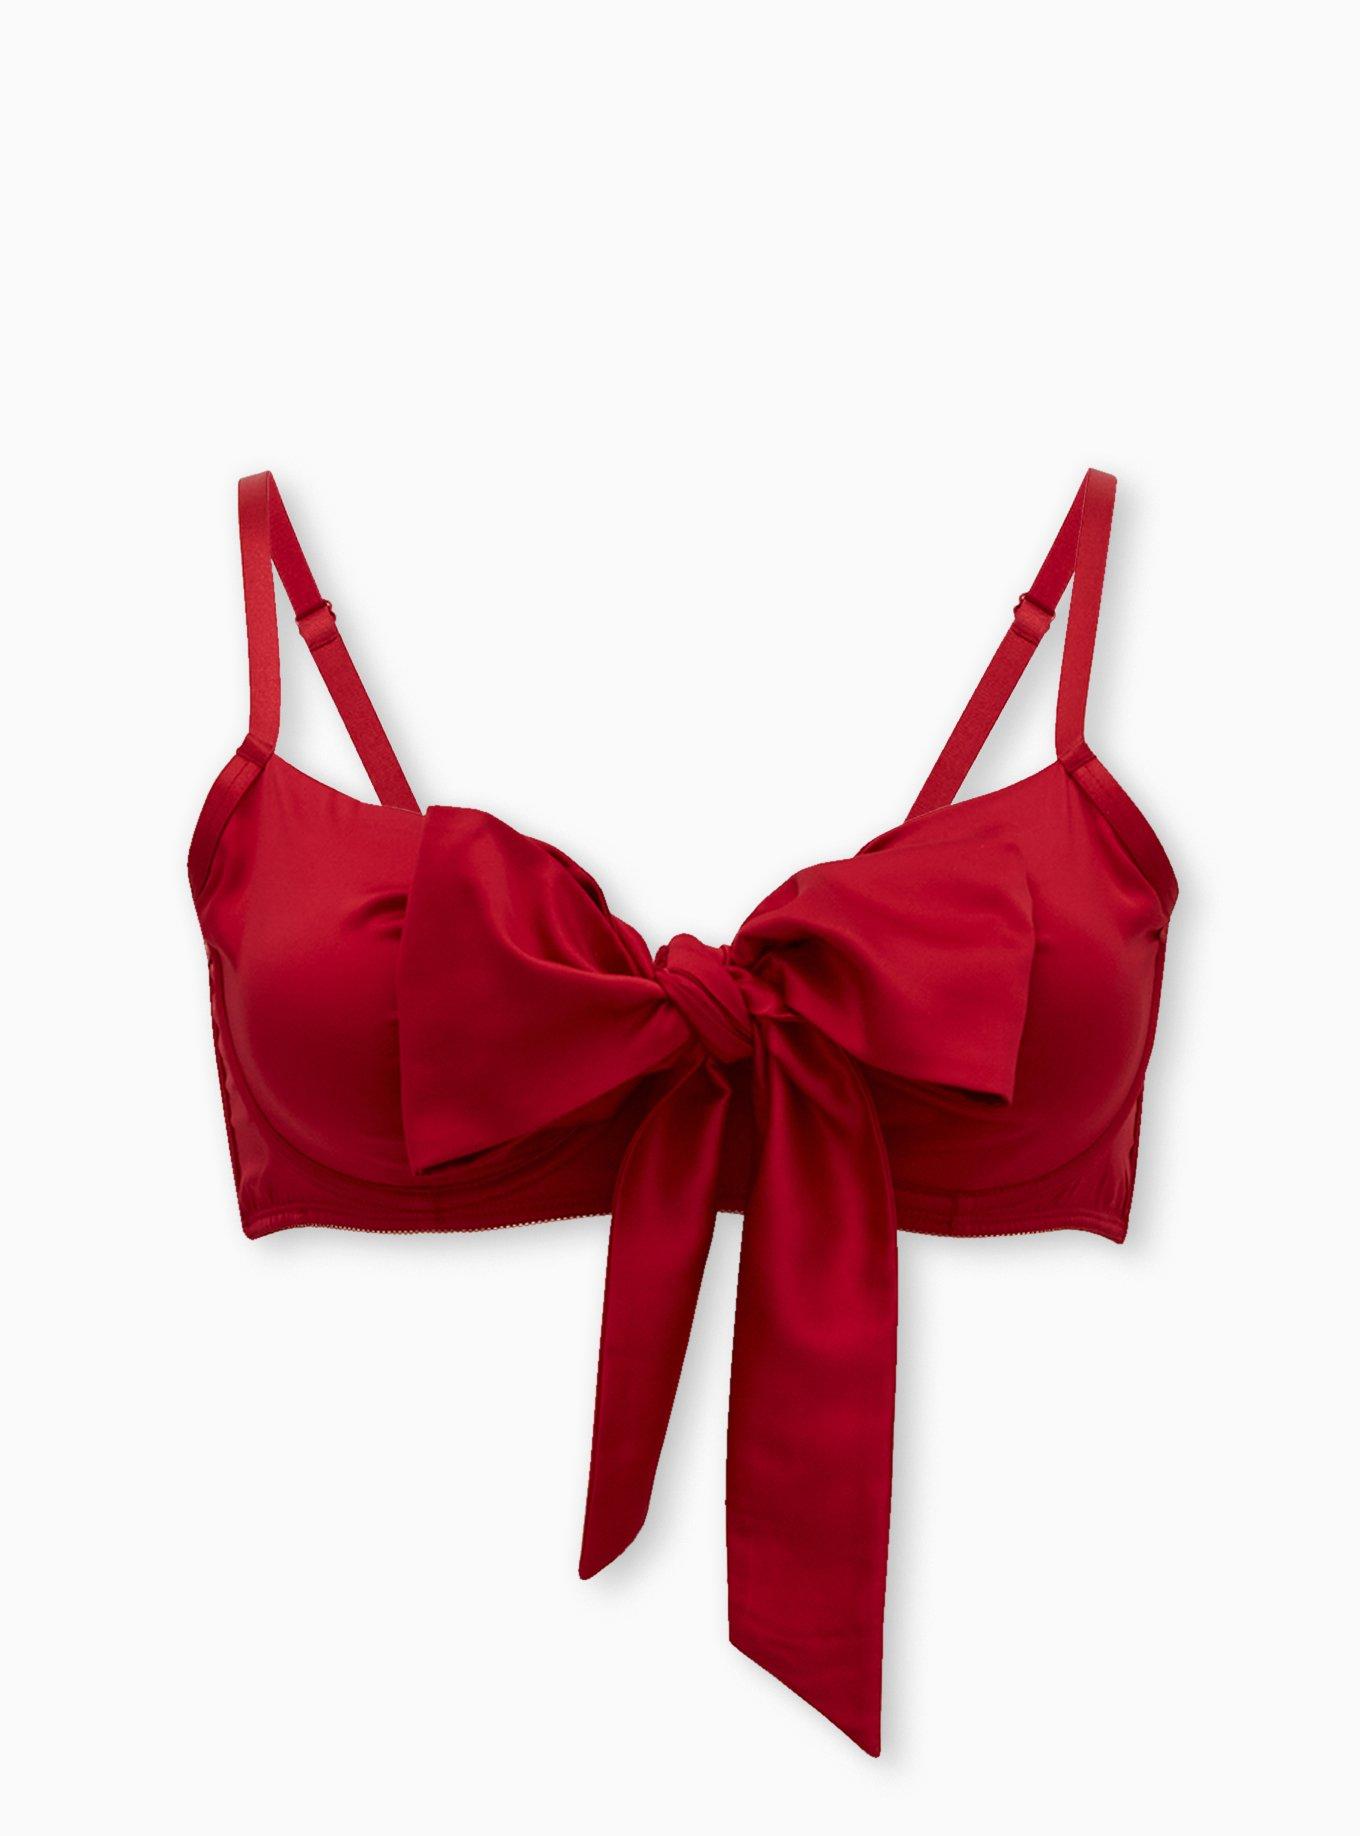 Ruby Ribbon Best Lingerie & Accessories in Minneapolis